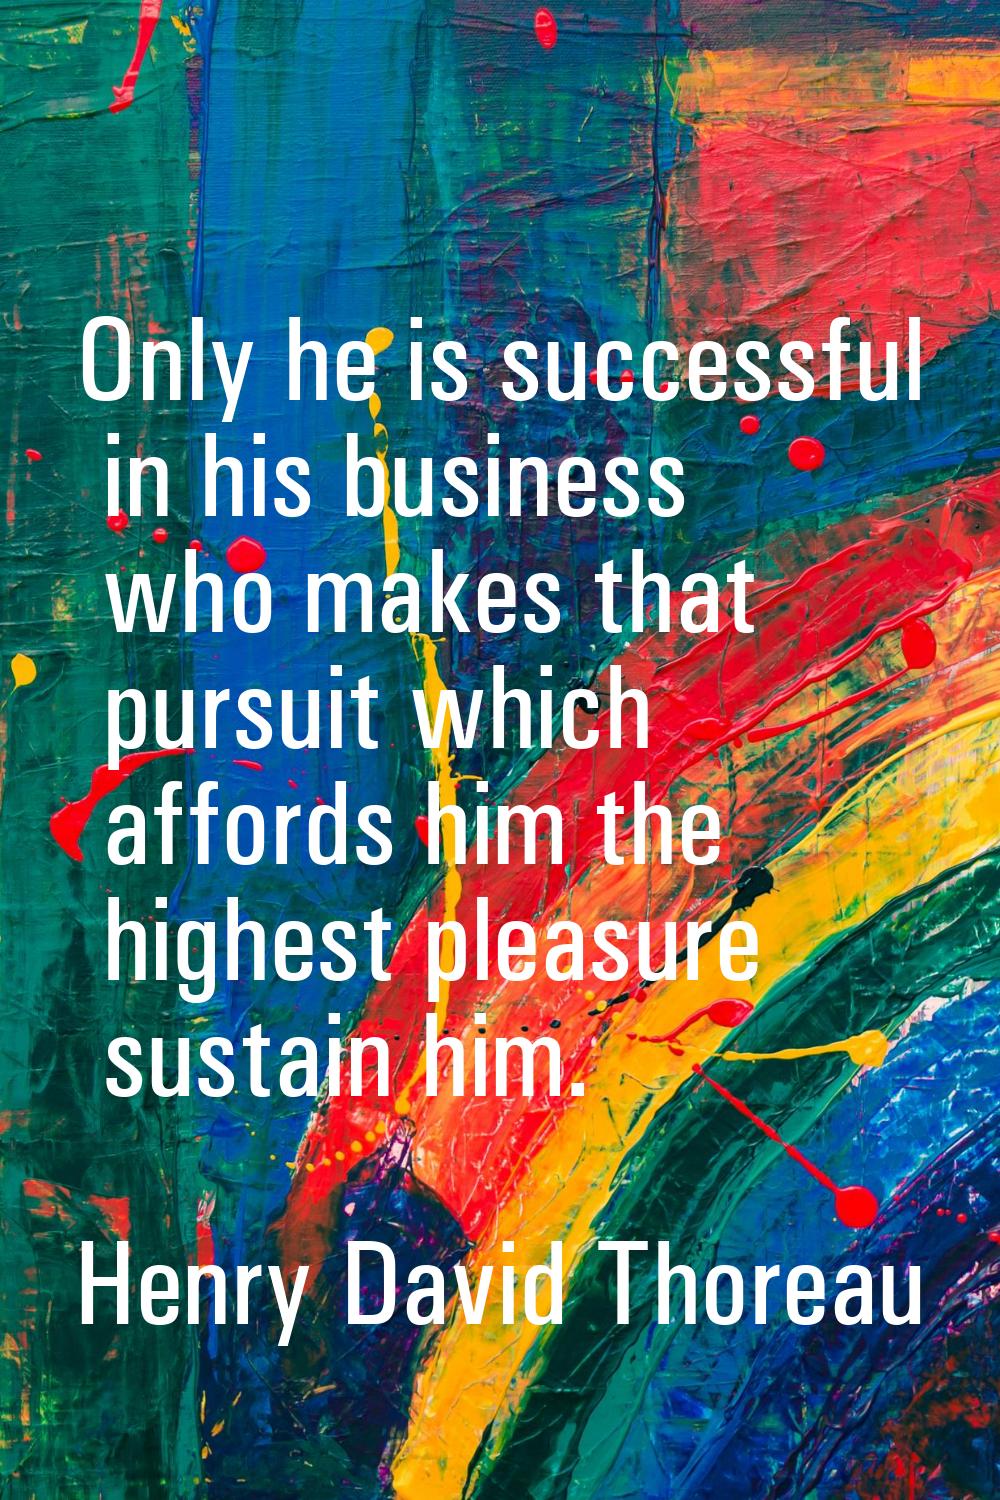 Only he is successful in his business who makes that pursuit which affords him the highest pleasure